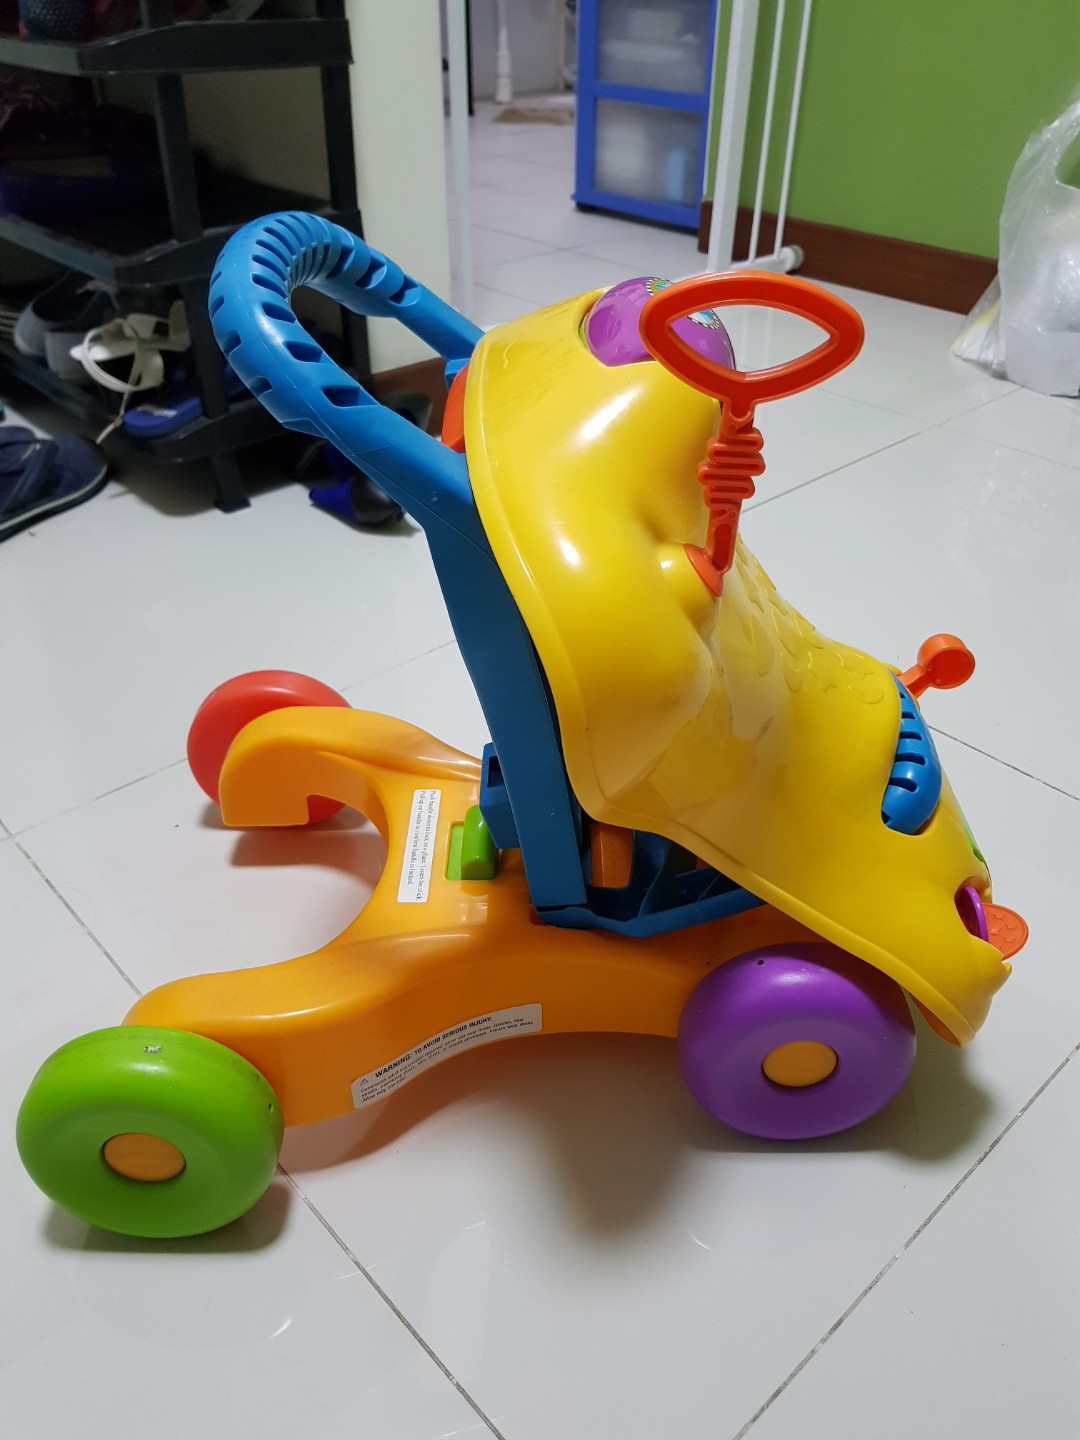 used baby walker for sale